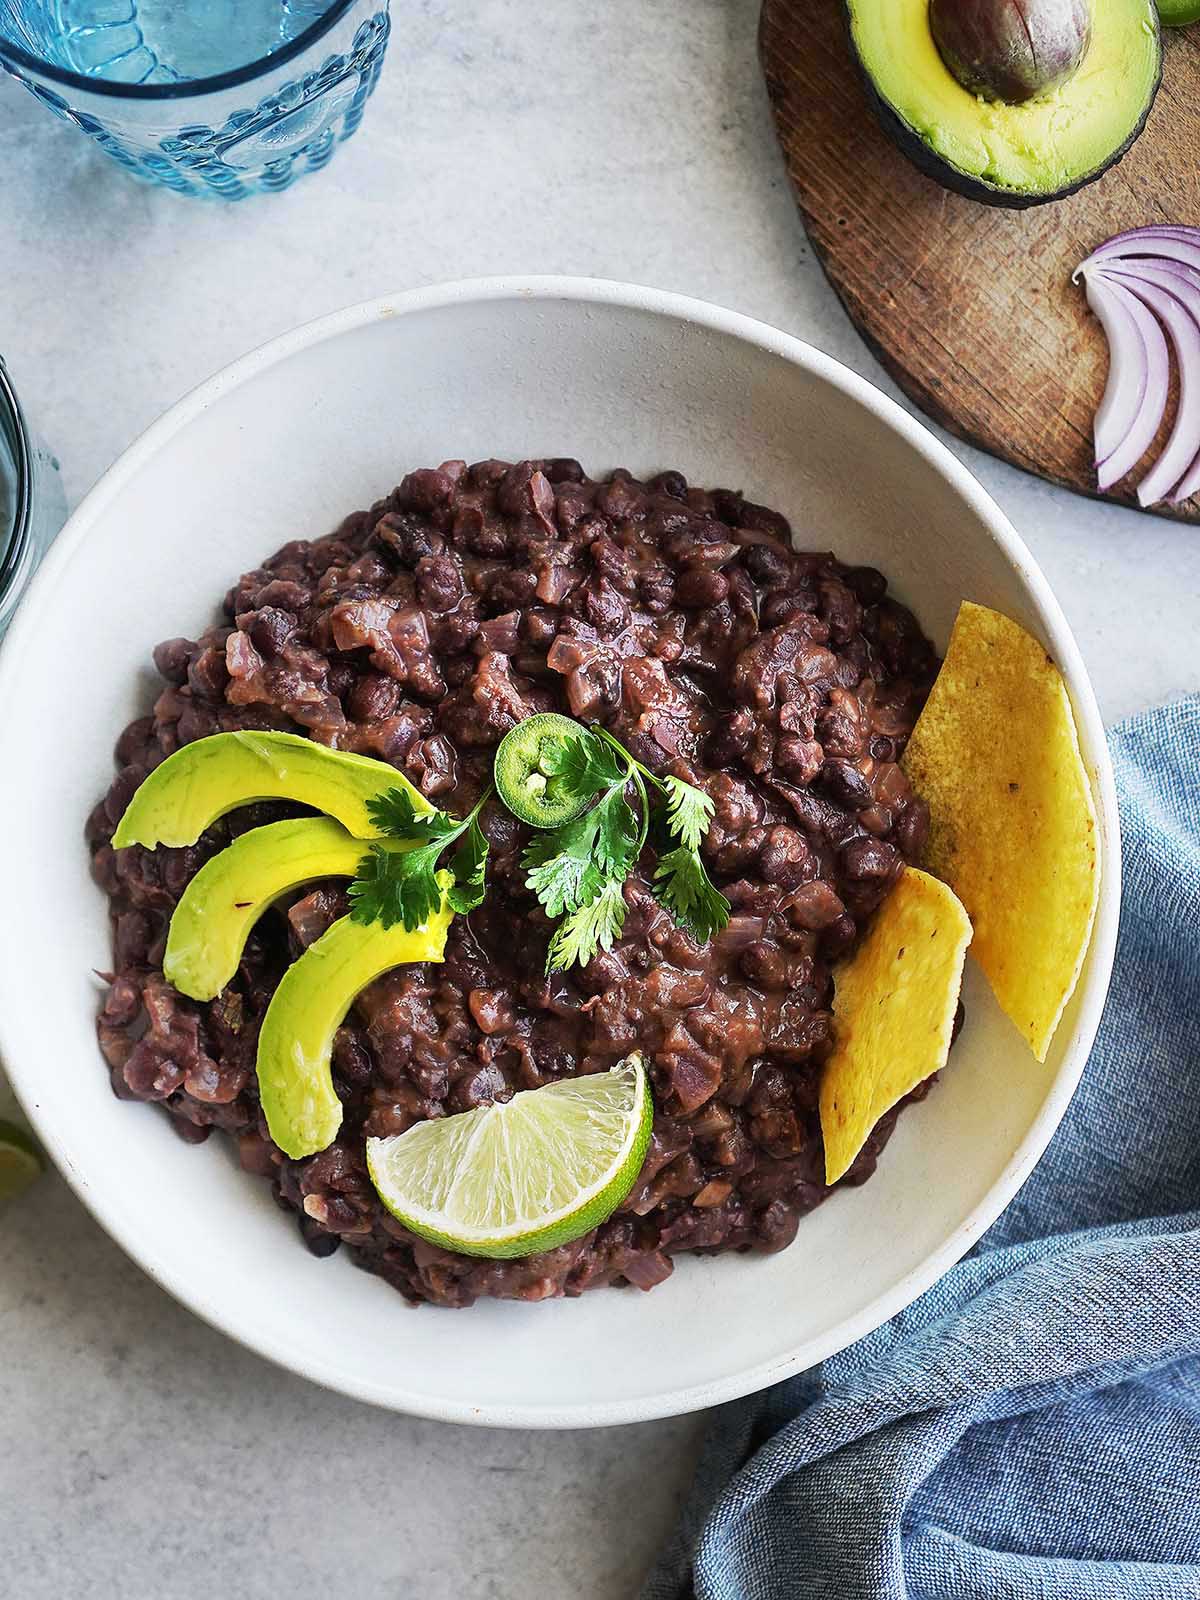 A bowl refried black beans garnished with avocado and tortilla chips.